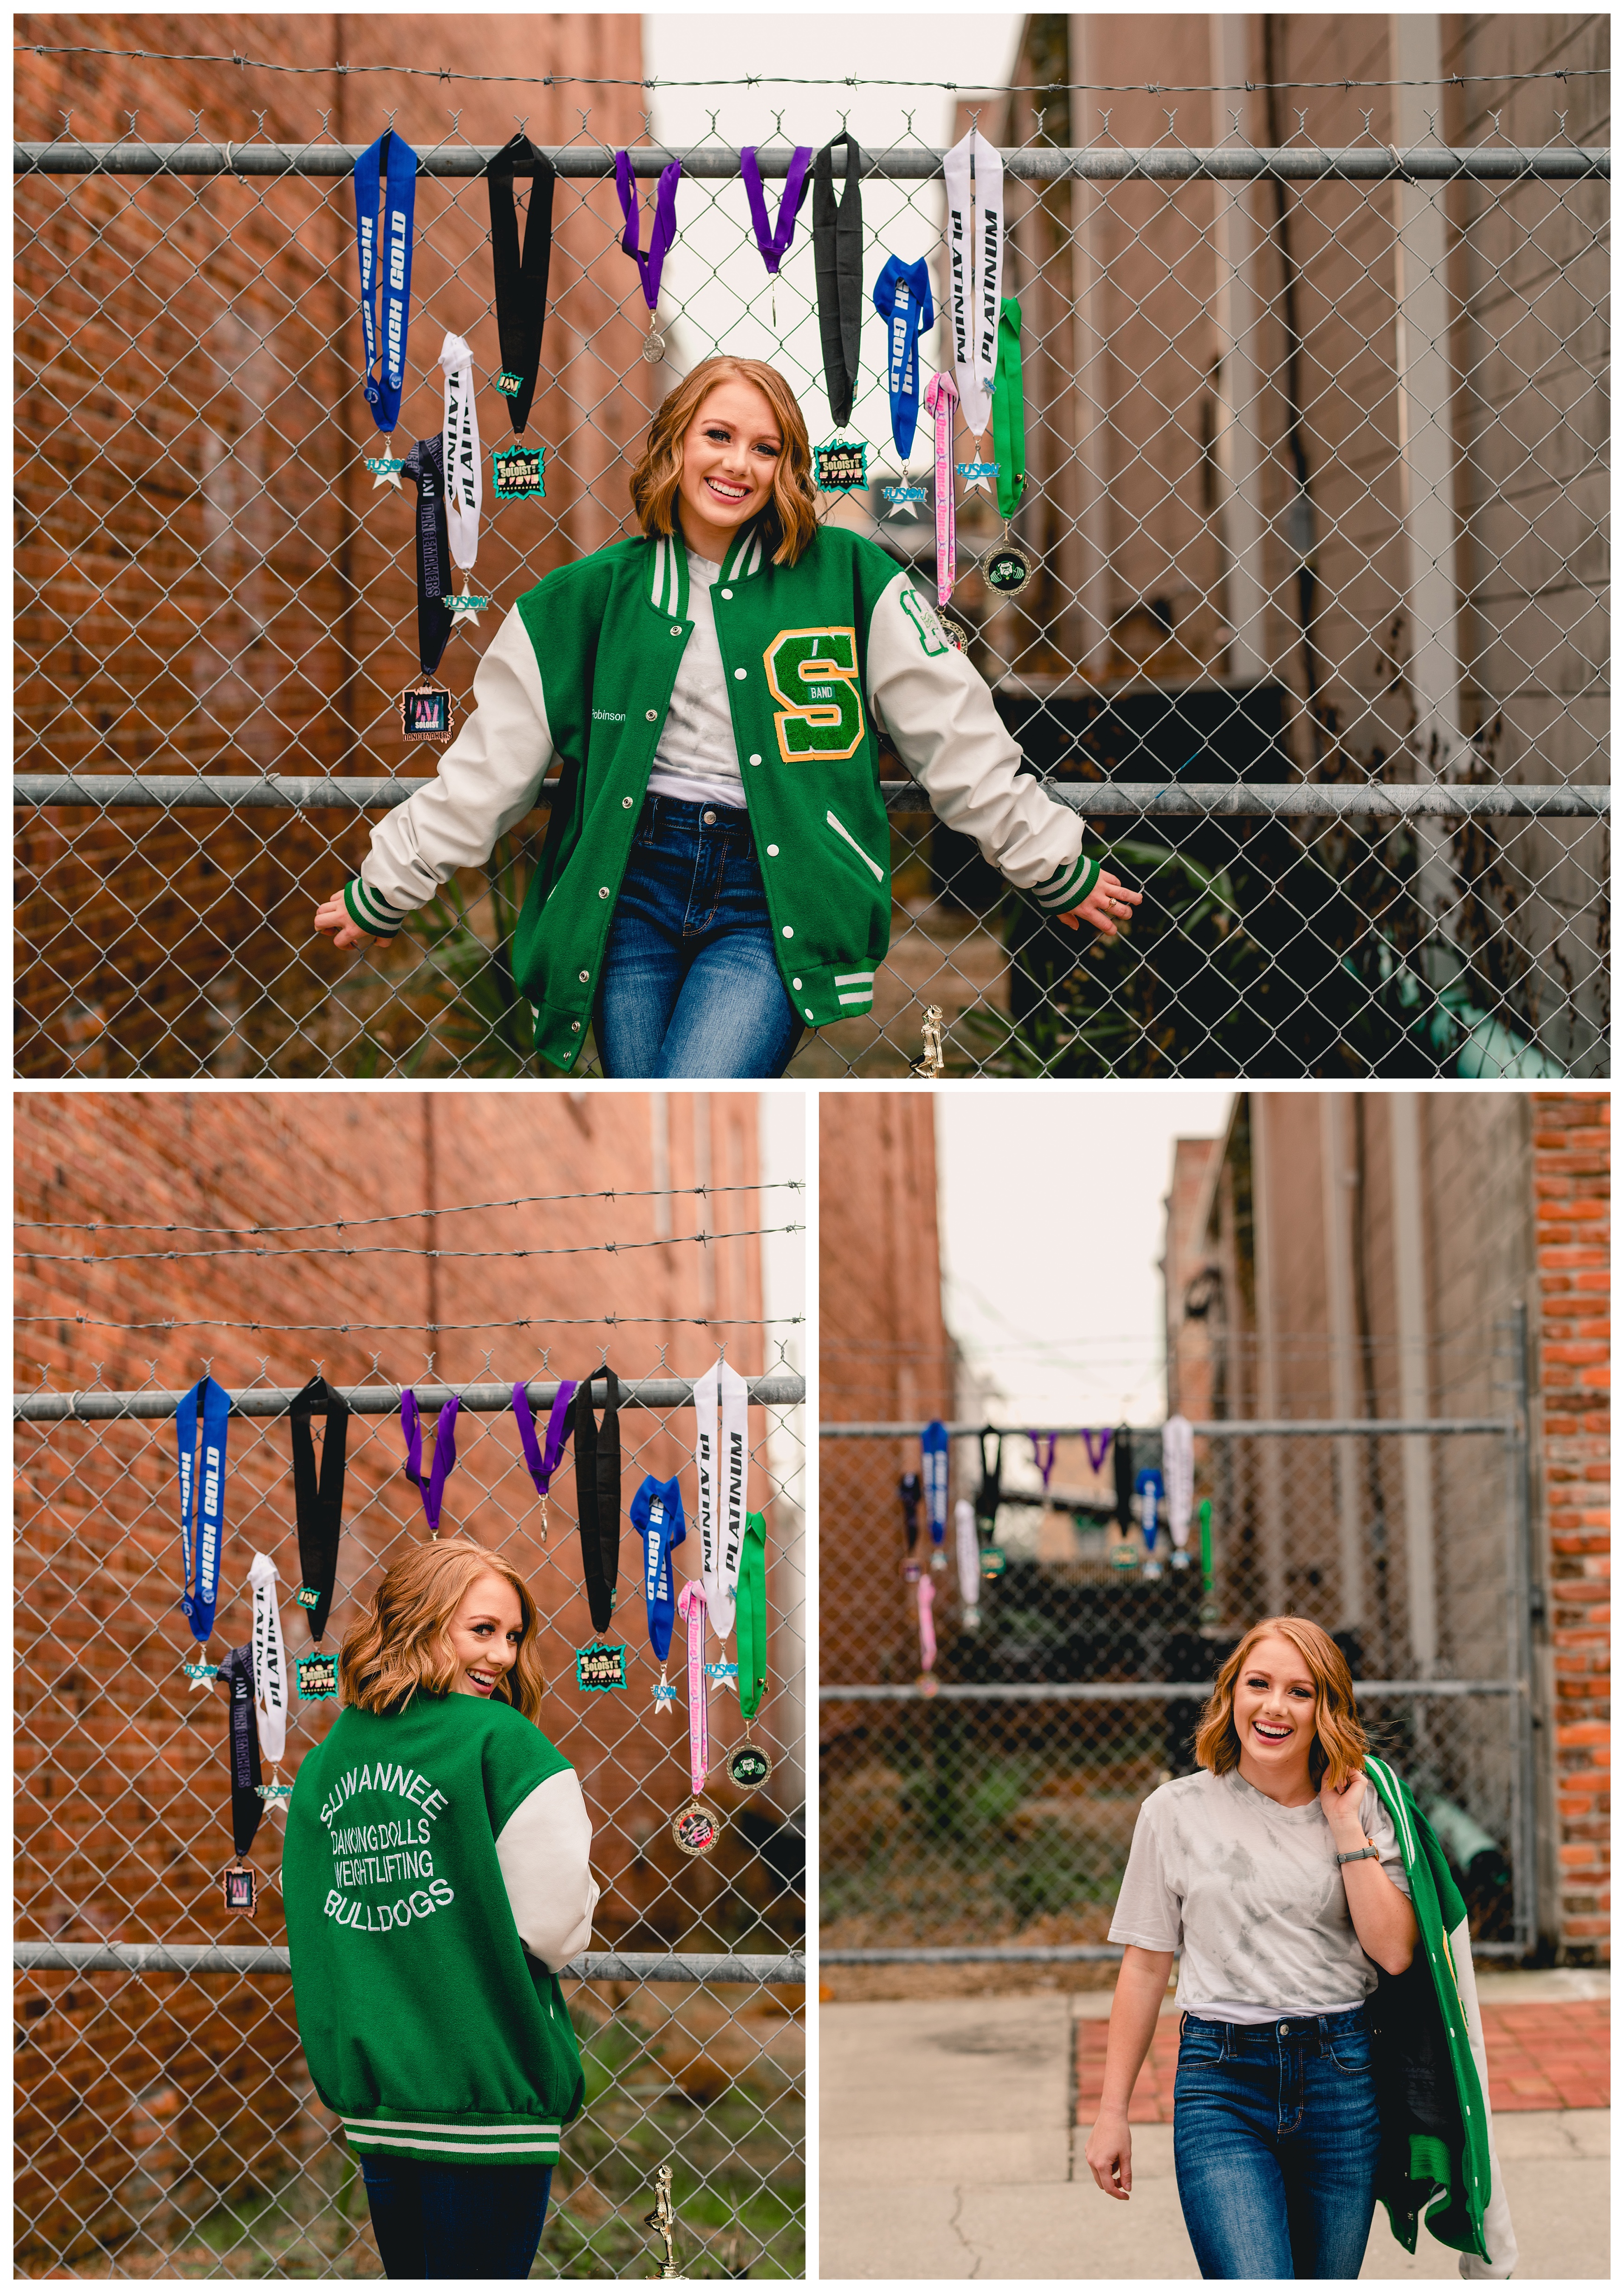 Suwannee senior shows off lettermen jacket and medals from sporting events. Shelly Williams Photography